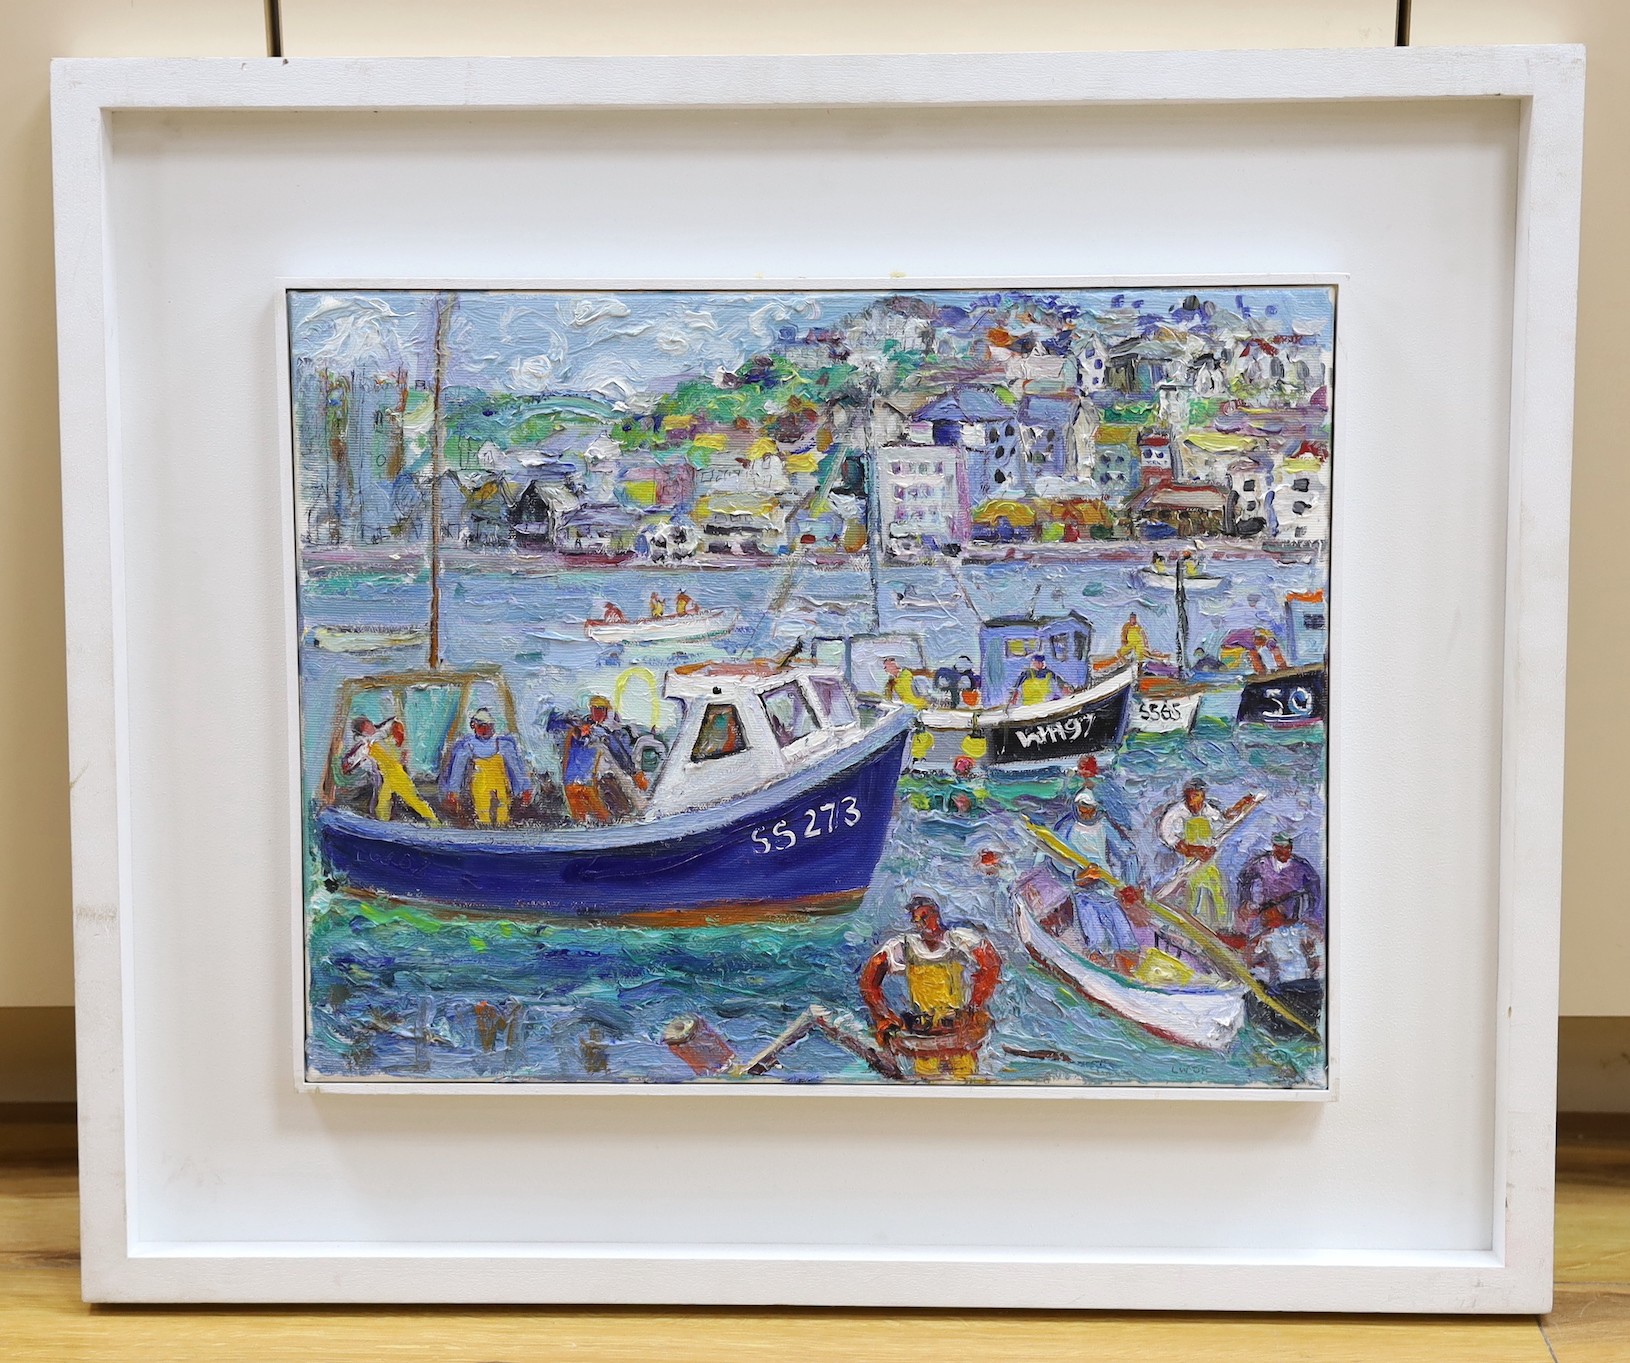 Linda Weir (1951-), oil on canvas, 'Men Coming Home, St Ives Harbour', signed and dated '08, 36 x 46 cm.